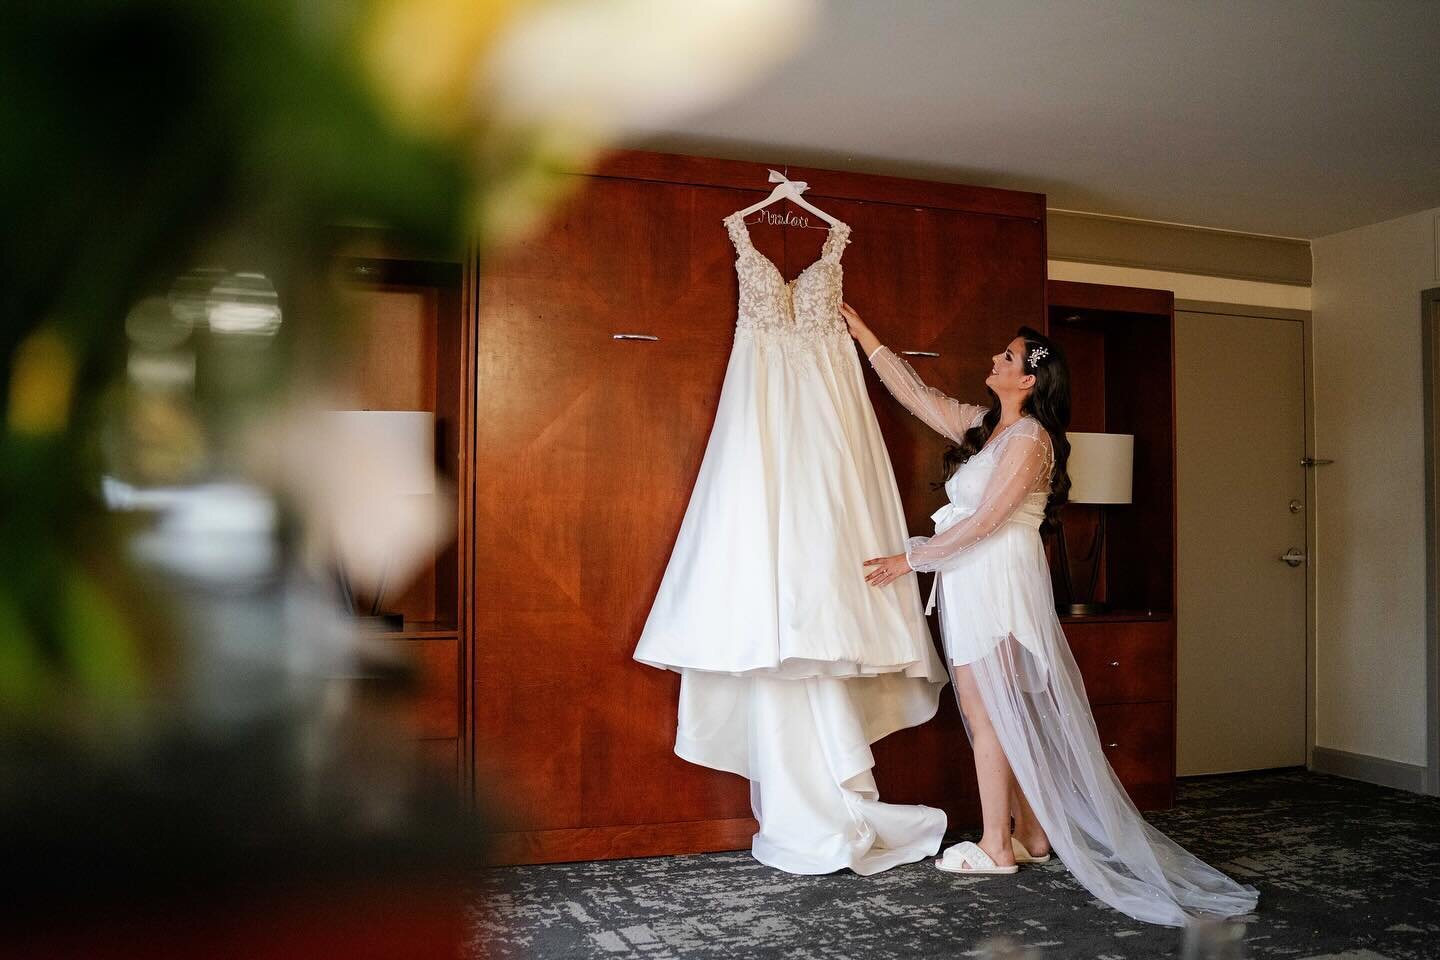 Get ready with Julianne ✨ 
.
.
#ralphdepirophotography 📸 #njweddingphotography #njweddingphotographer #northjerseyweddings #weddingphotography #weddingday  #gettingmarried #herecomesthebride #photooftheday #weddingbride #bride #bridetobe #gettingrea